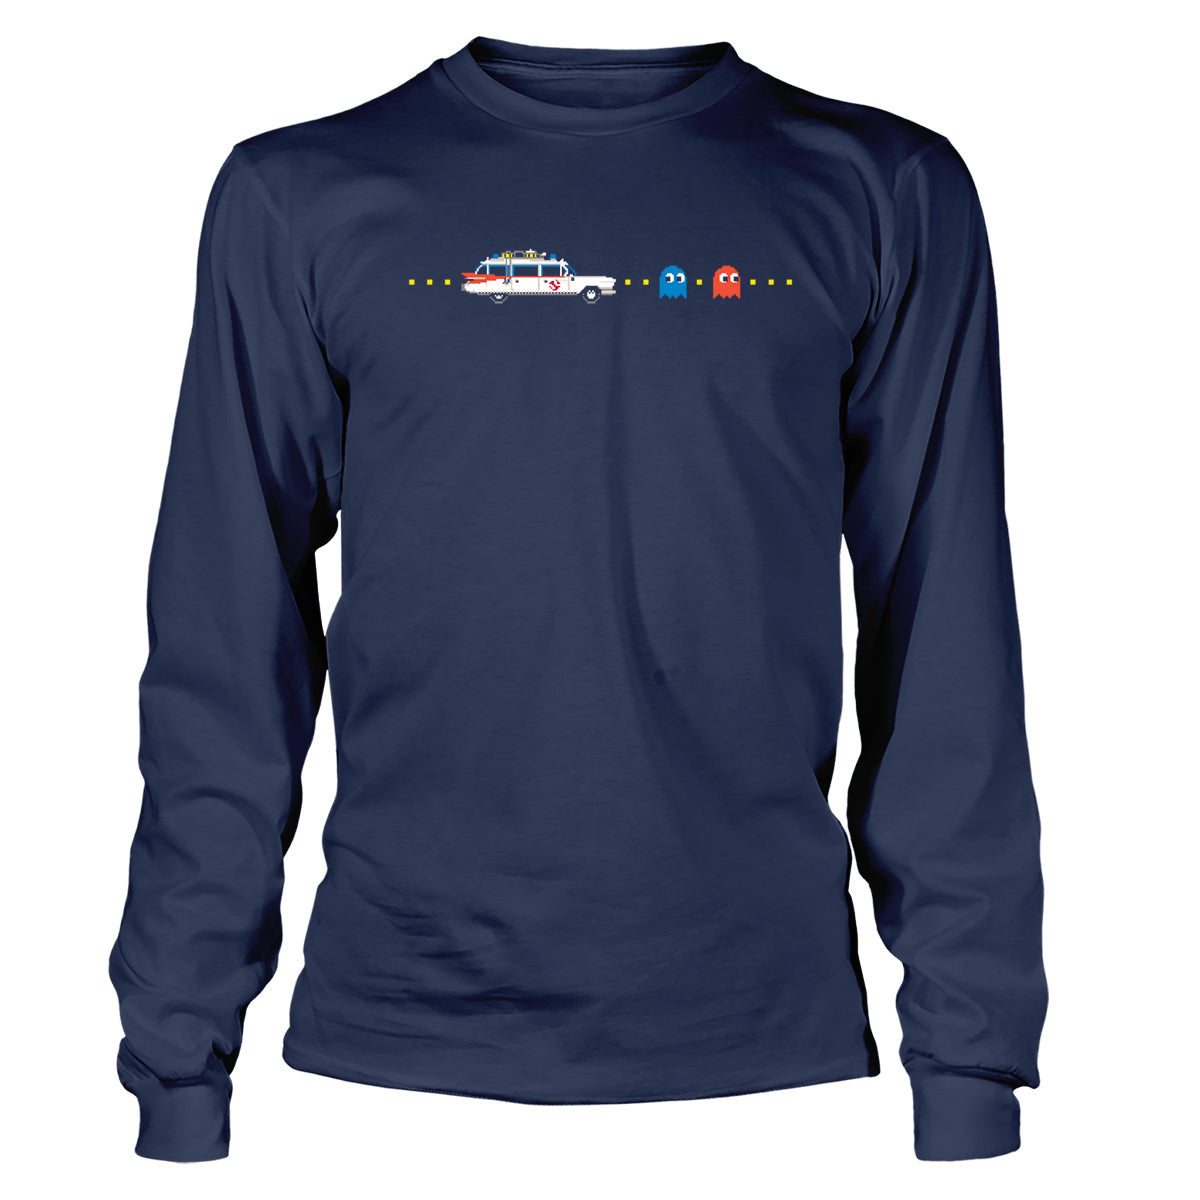 Busters Long Sleeve T-Shirt